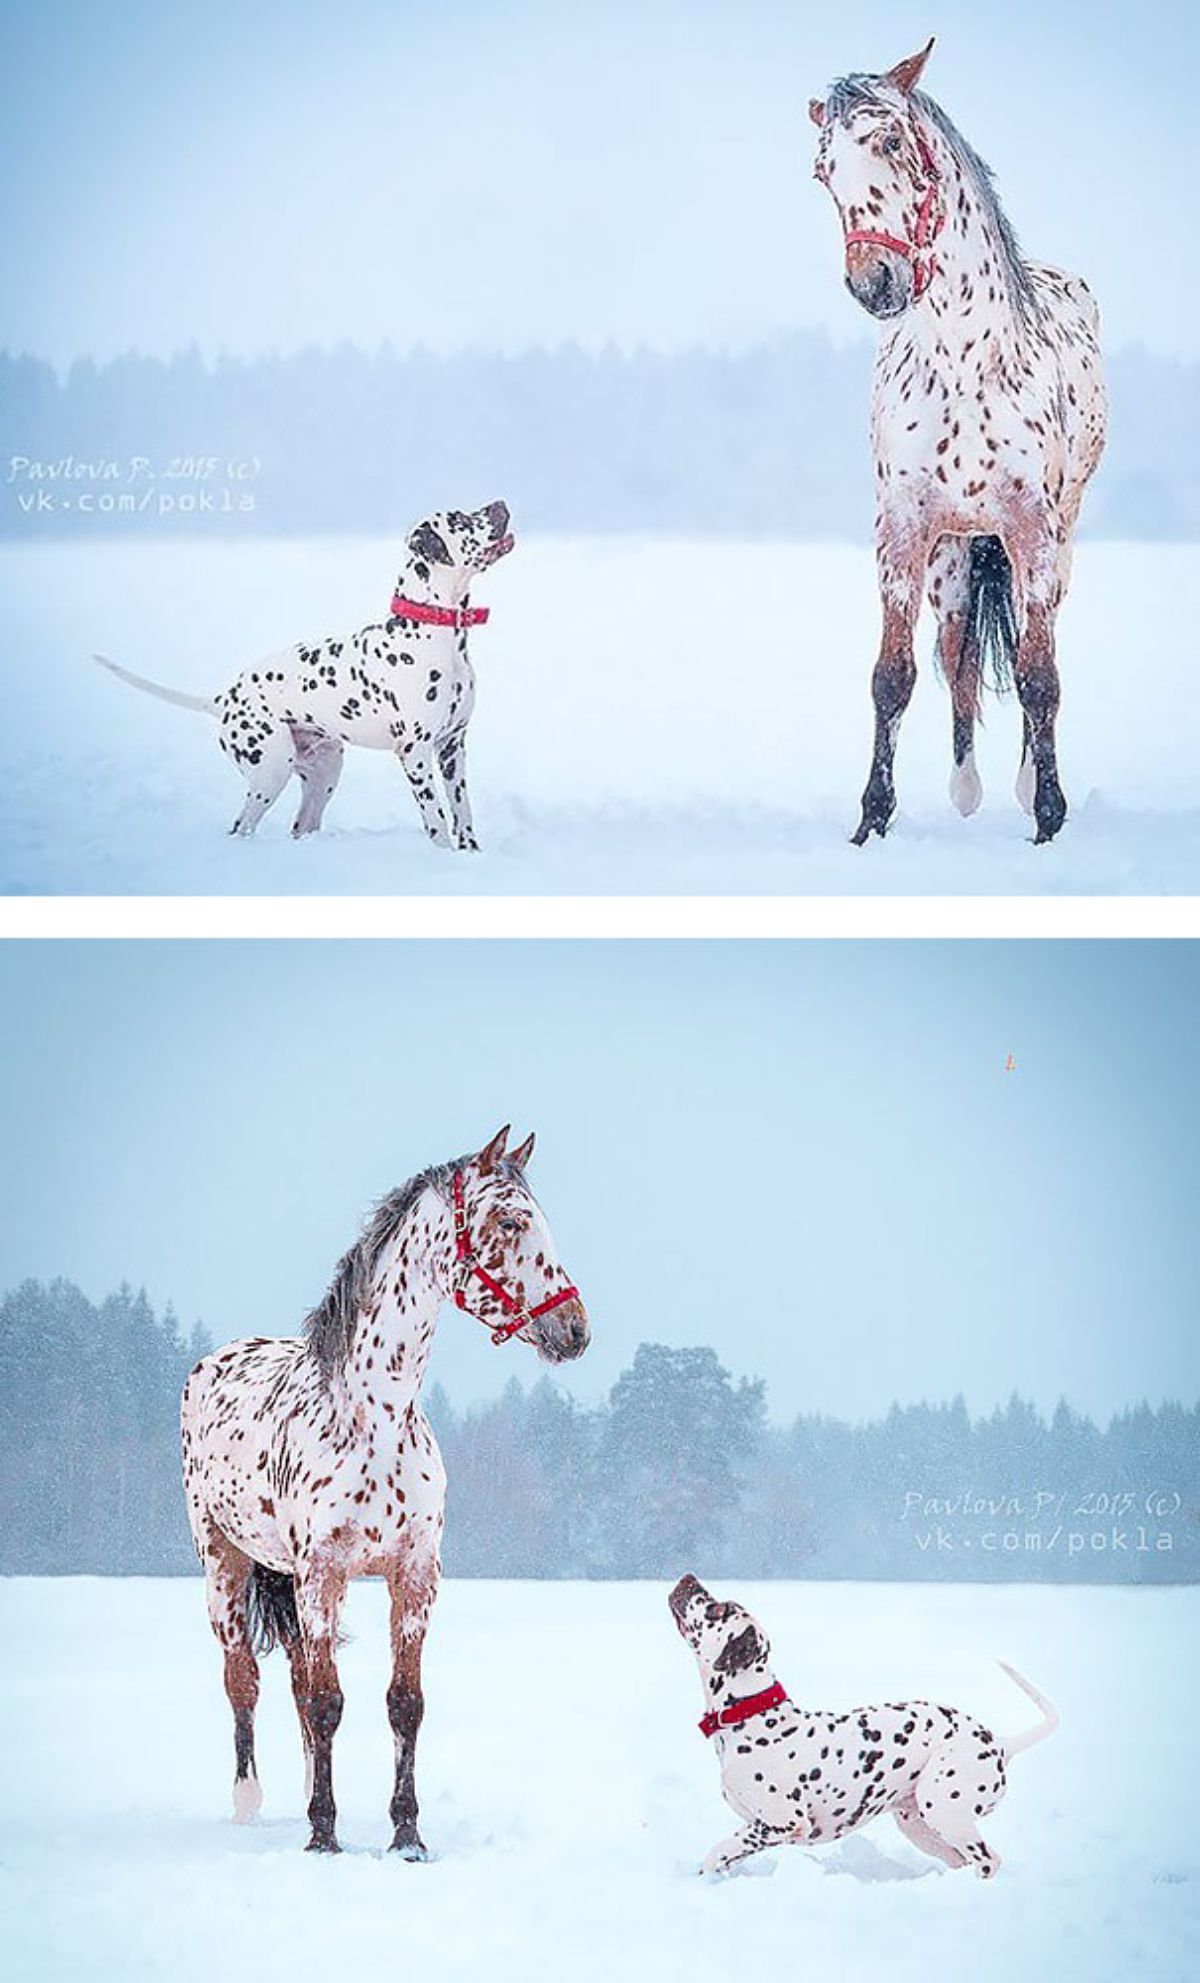 two photos of a dalmation with a white horse with black spots in the snow